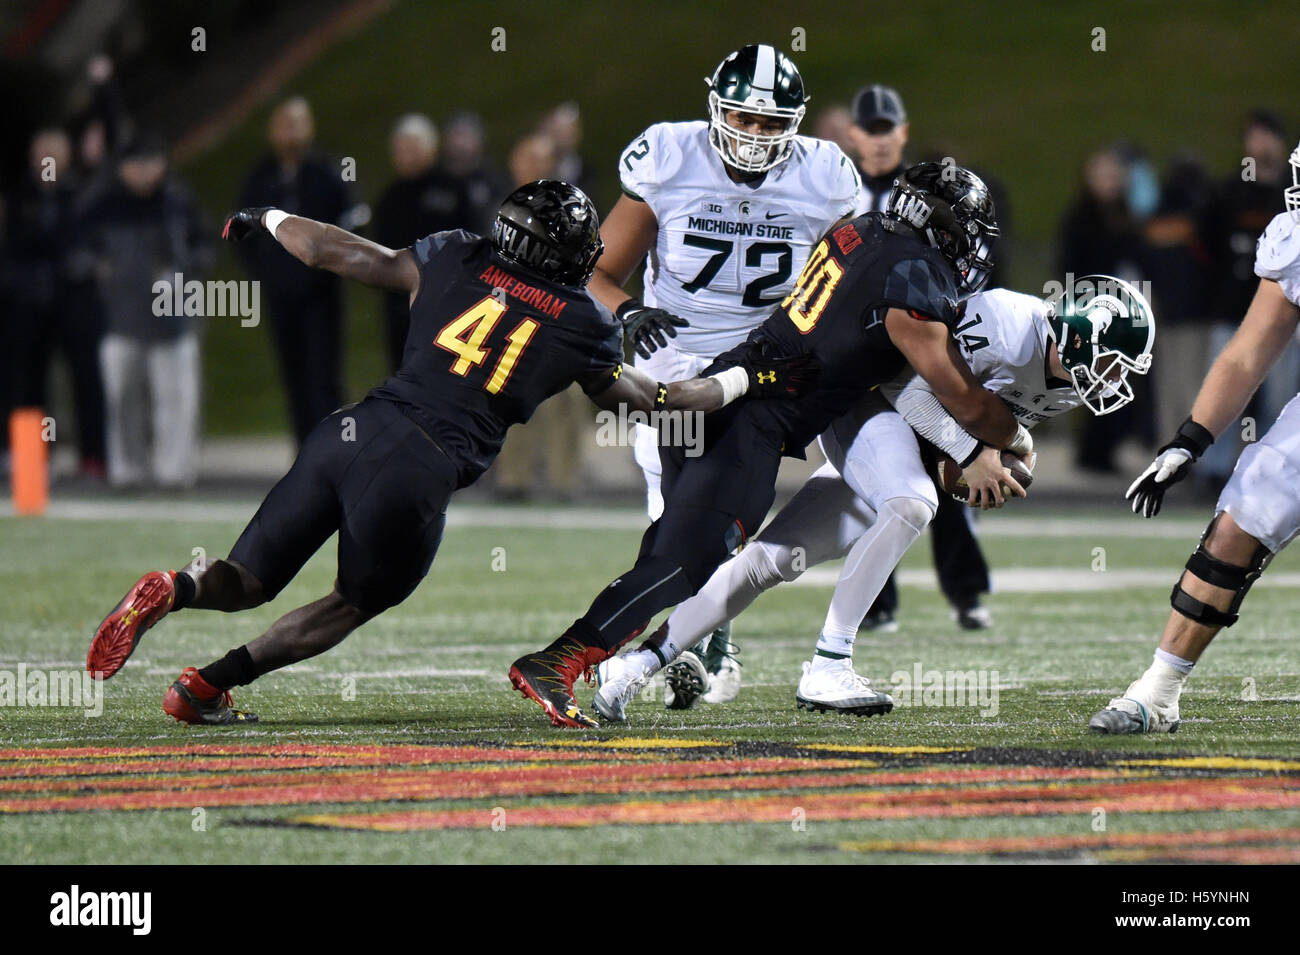 College Park, Maryland, USA. 22nd Oct, 2016. Maryland Terrapins defensive lineman ROMAN BRAGLIO (90) sacks Michigan State Spartans quarterback BRIAN LEWERKE (14) during a game played at Maryland Stadium at College Park, MD. The Terrapins beat the Spartans 28-17. © Ken Inness/ZUMA Wire/Alamy Live News Stock Photo